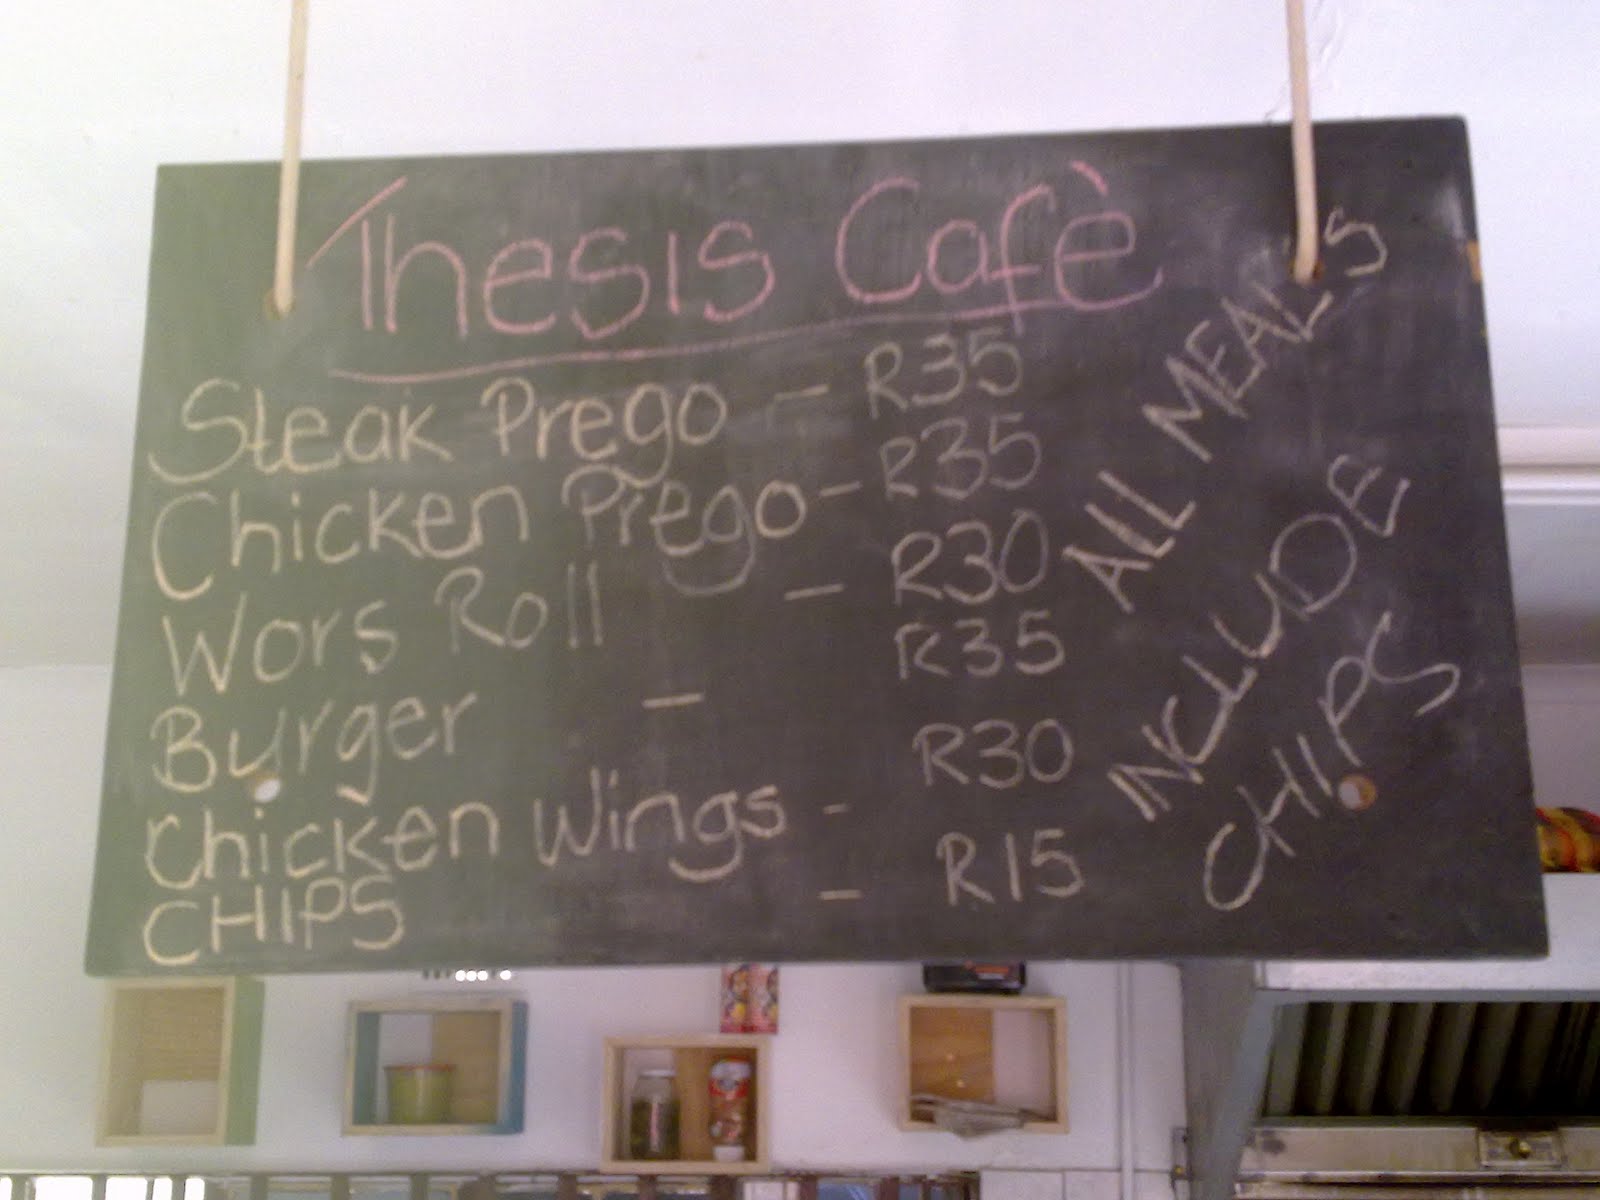 Thesis collection: THESIS Cafe